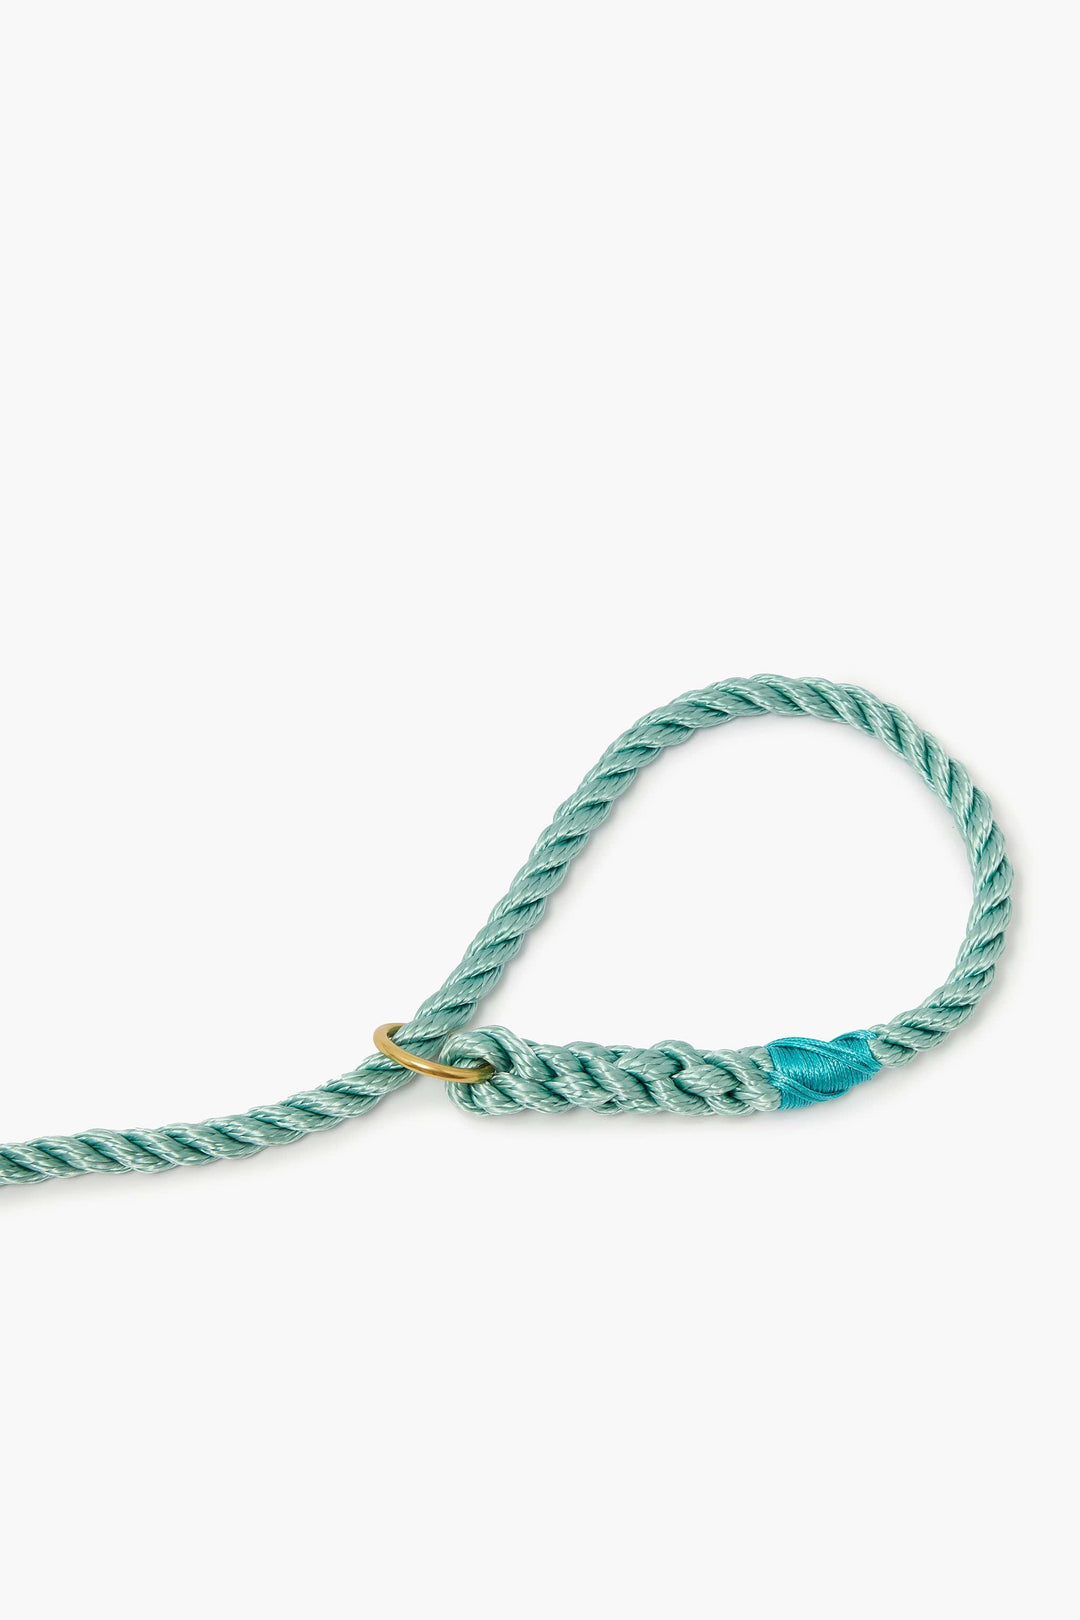 Rope dog slip lead for gundogs and training in seafoam green, 5ft long